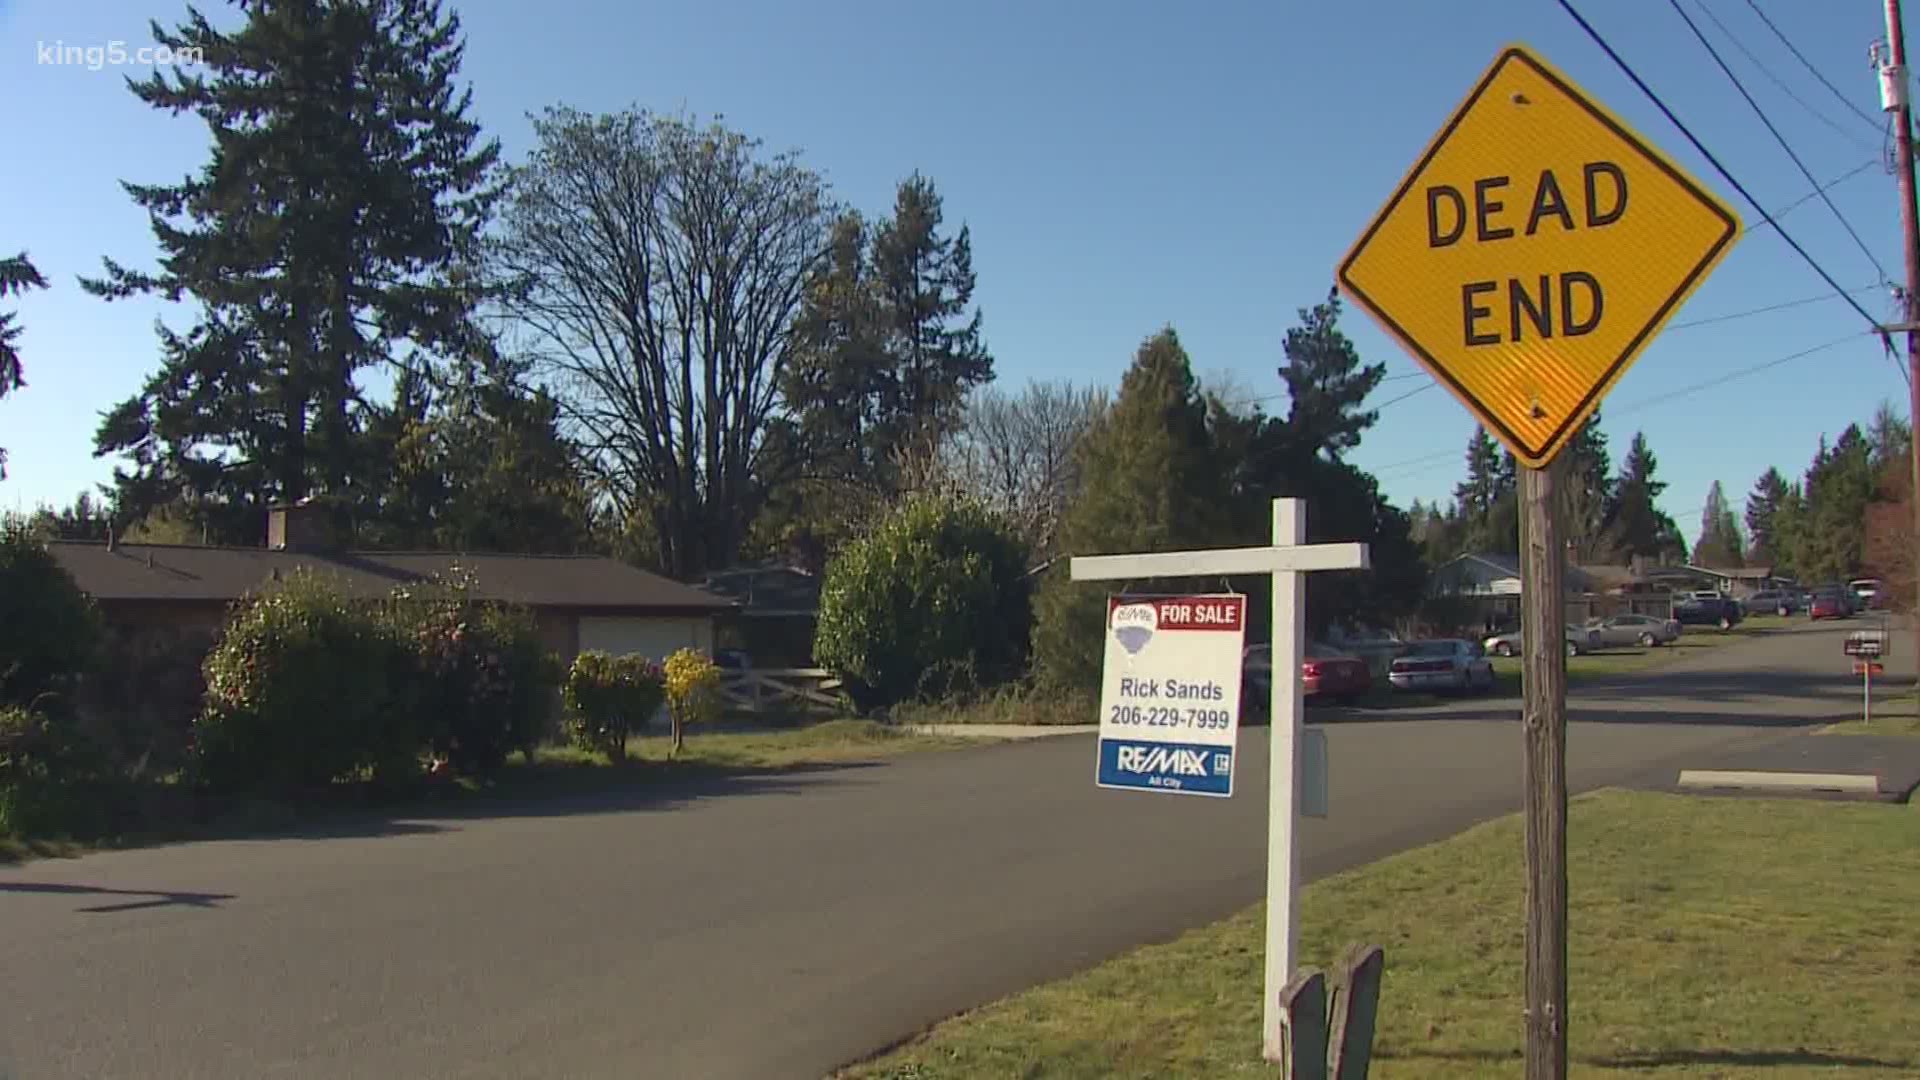 According to the IRS, the 98188 zip code has the lowest reported income in the Seattle area. Many residents are facing hardships amid layoffs and grocery shortages.